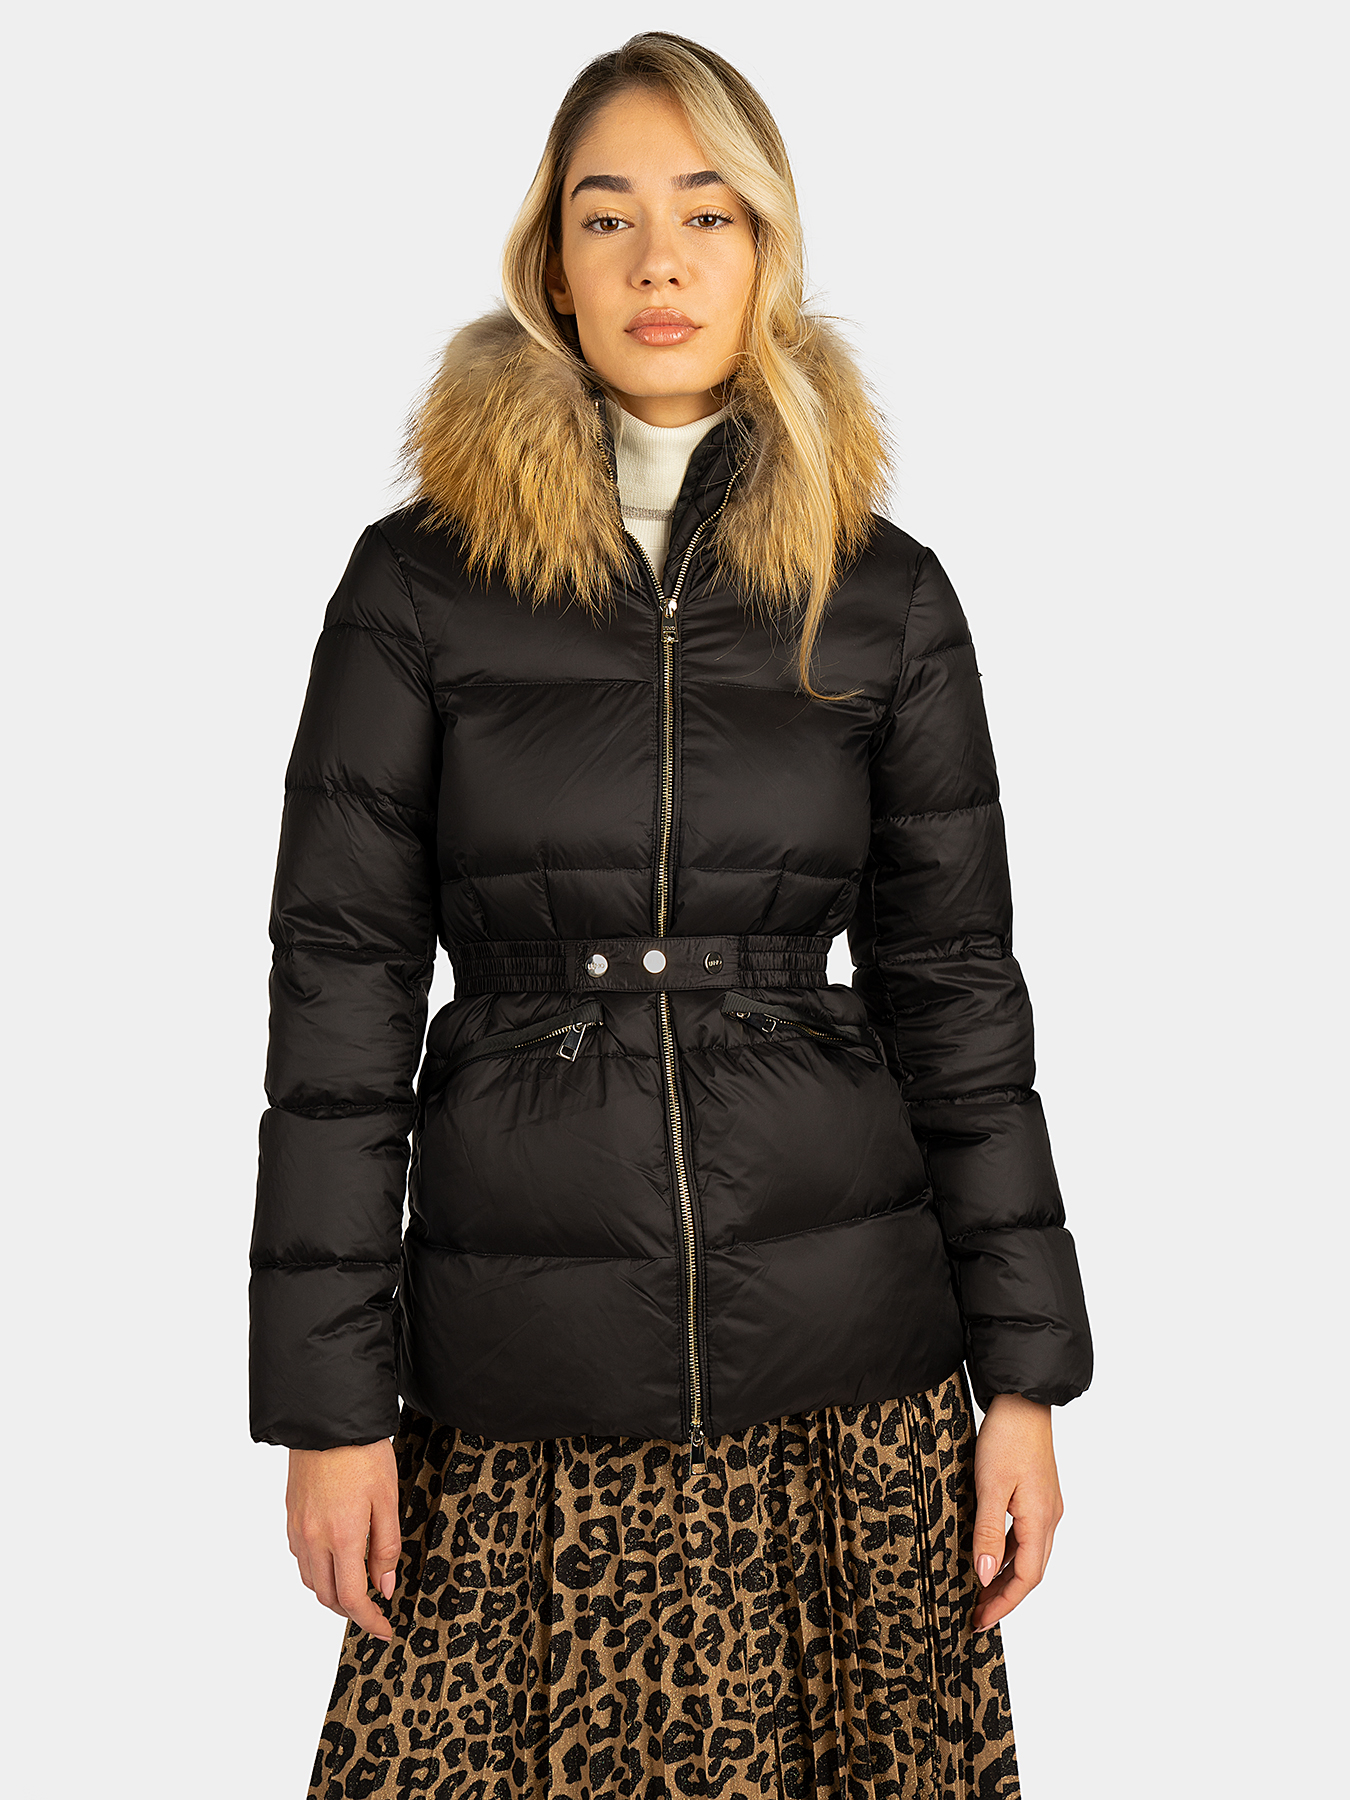 Padded jacket with faux fur collar in beige color brand LIU JO ...